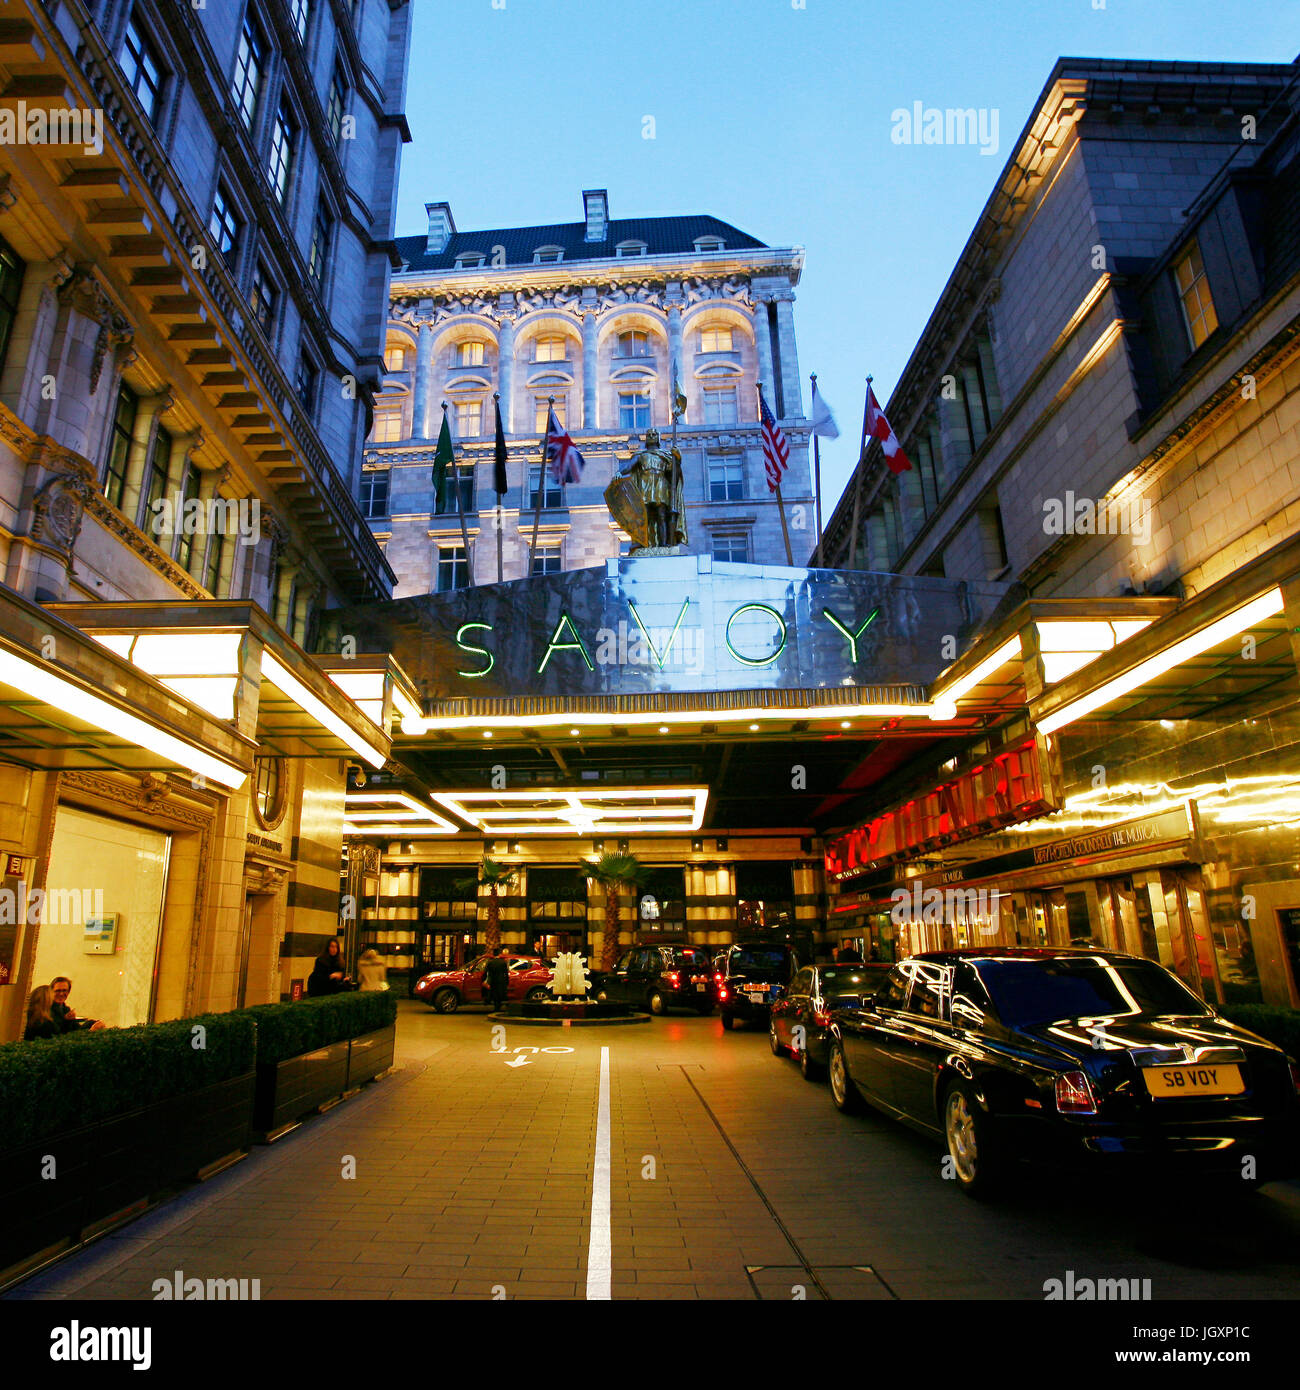 Outside view of Savoy hotel, Britain's first luxury hotel in central London, opened in 1889 and closed in 2007 for renovations reopened in Oct 2010. Stock Photo